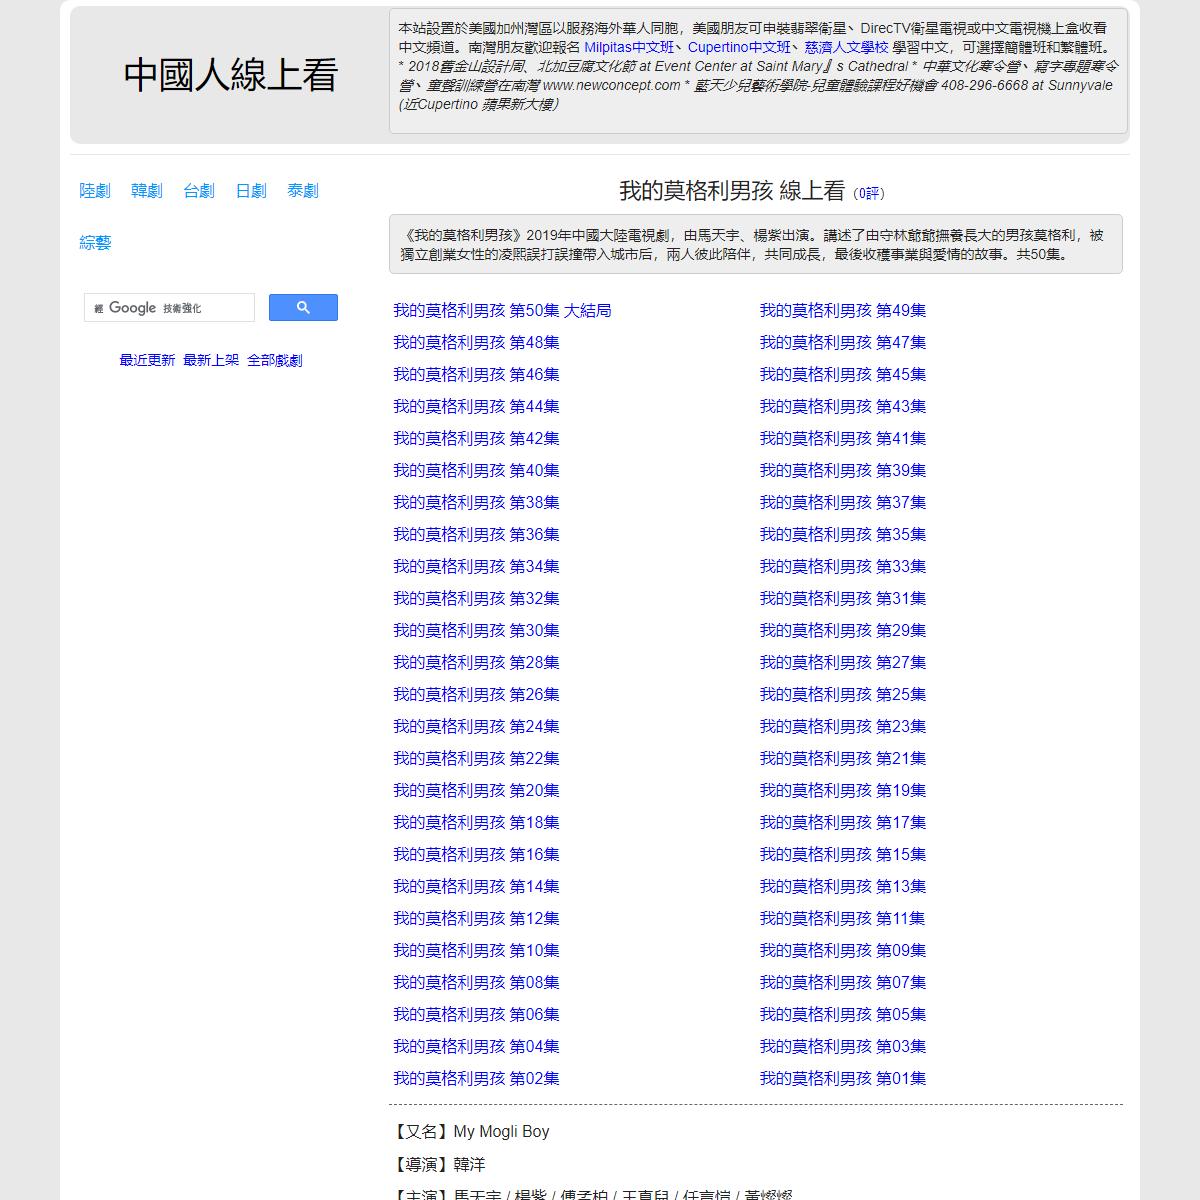 A complete backup of https://chinaq.tv/cn190829b/